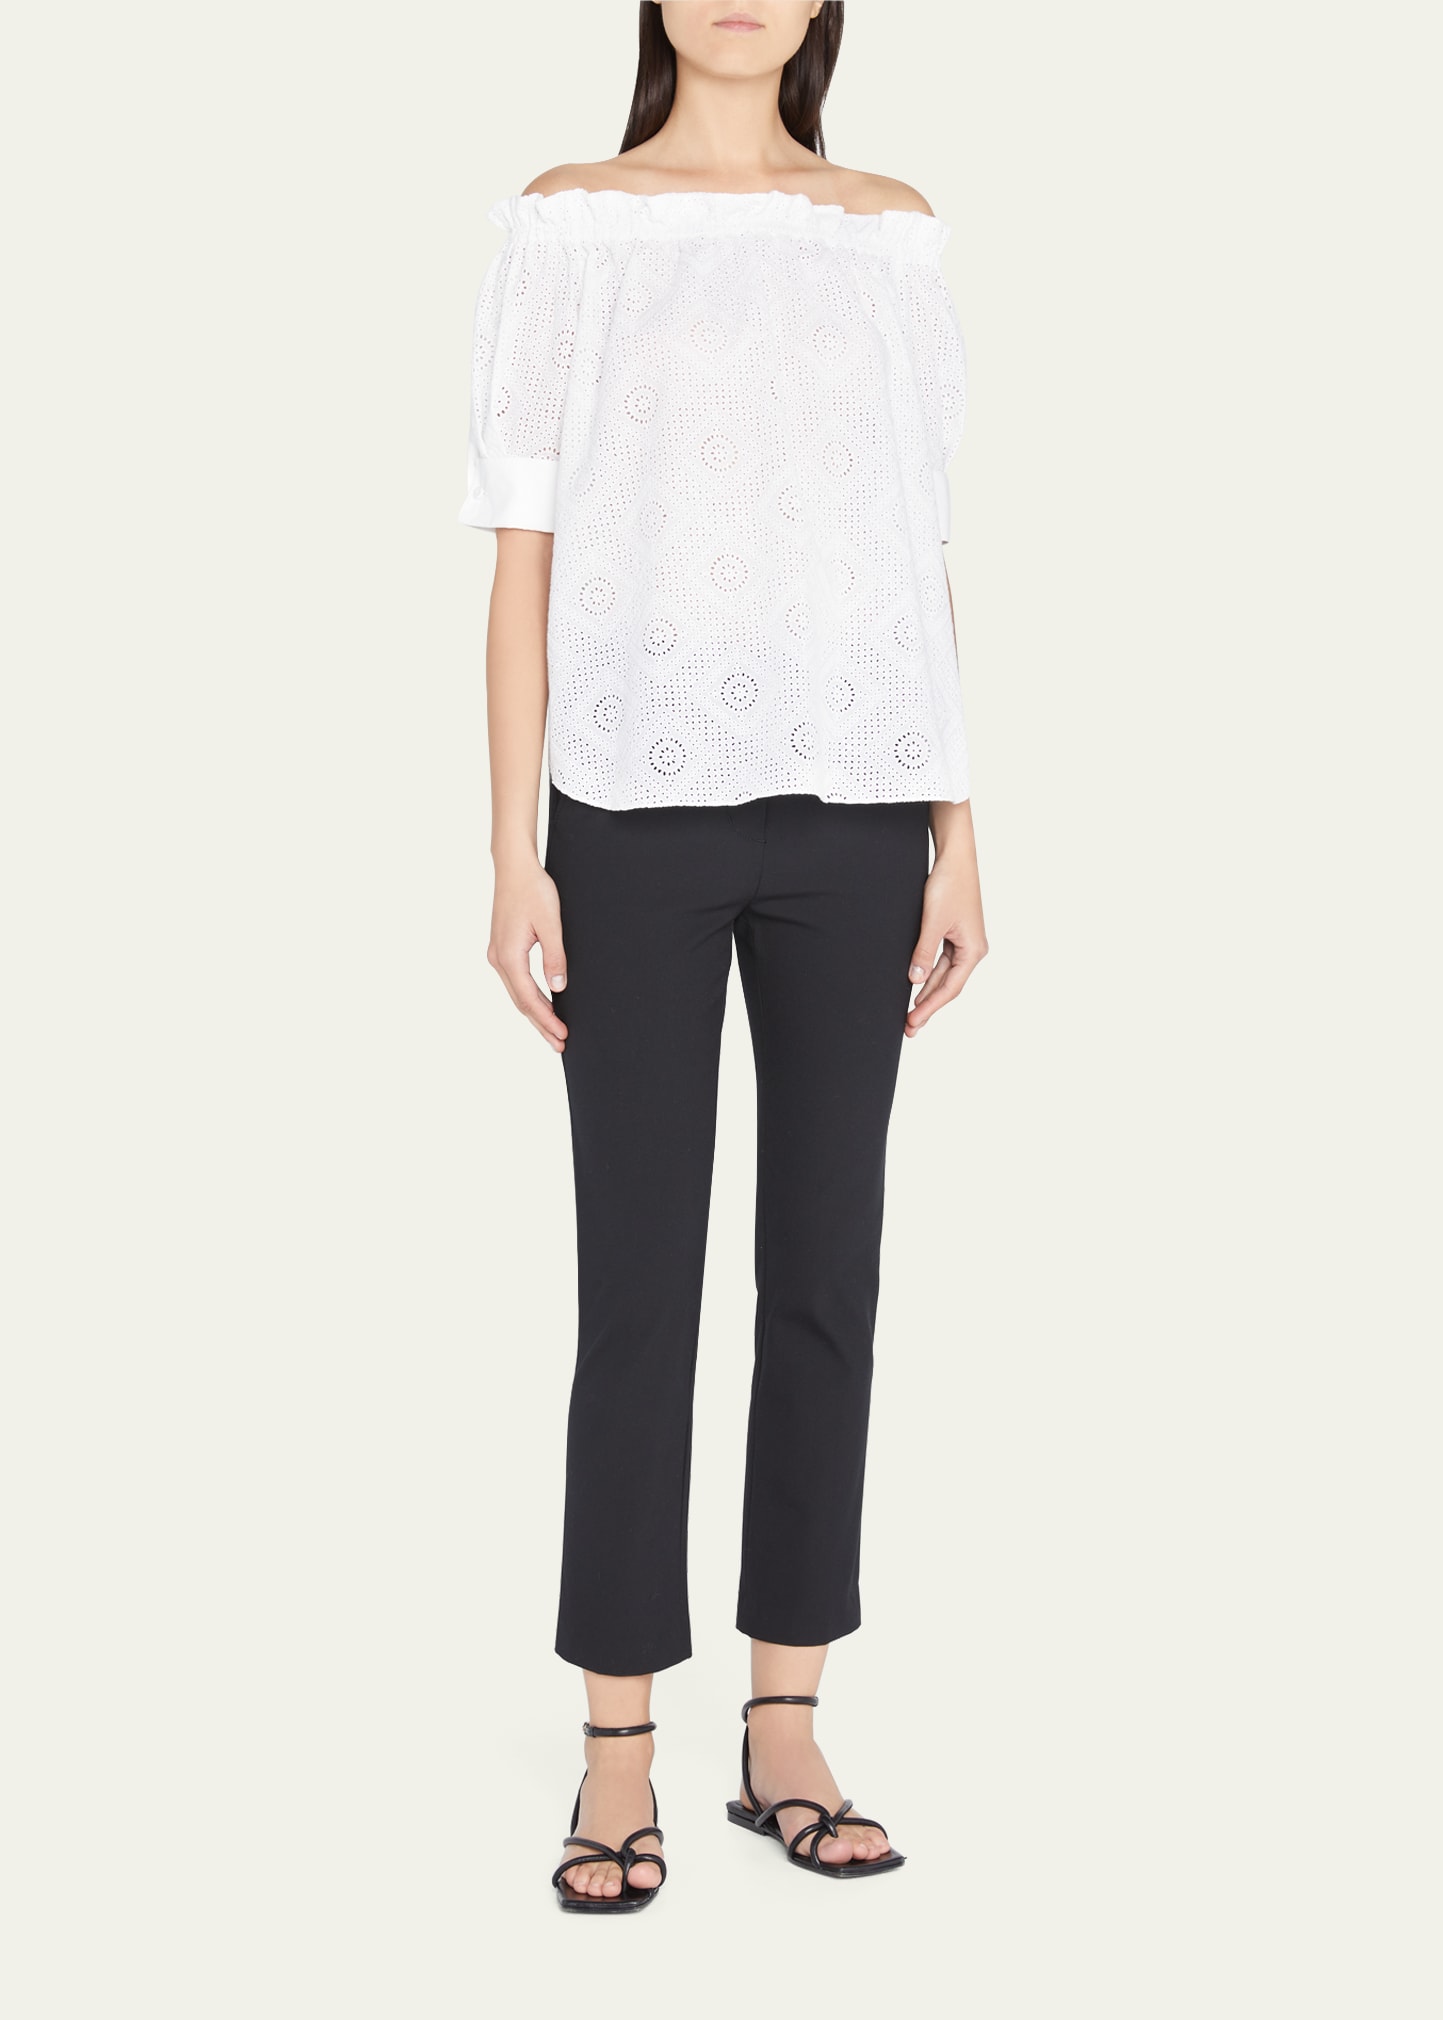 ADAM LIPPES OFF-THE-SHOULDER COTTON EYELET BLOUSE